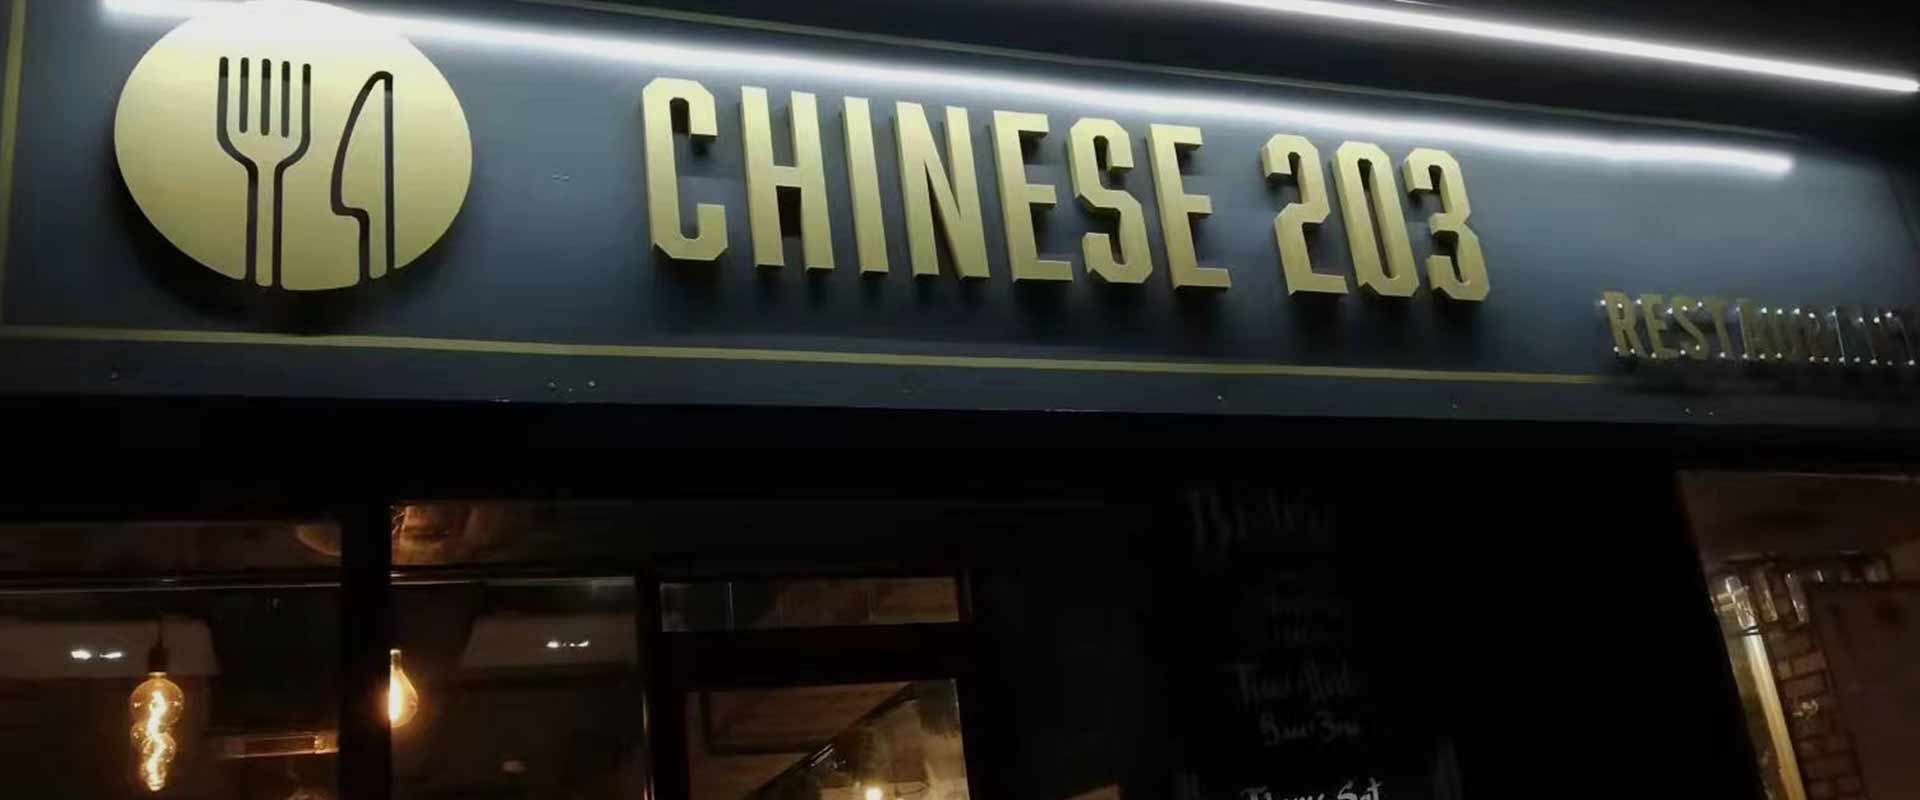 Chinese 203 Stockport Restaurant Images